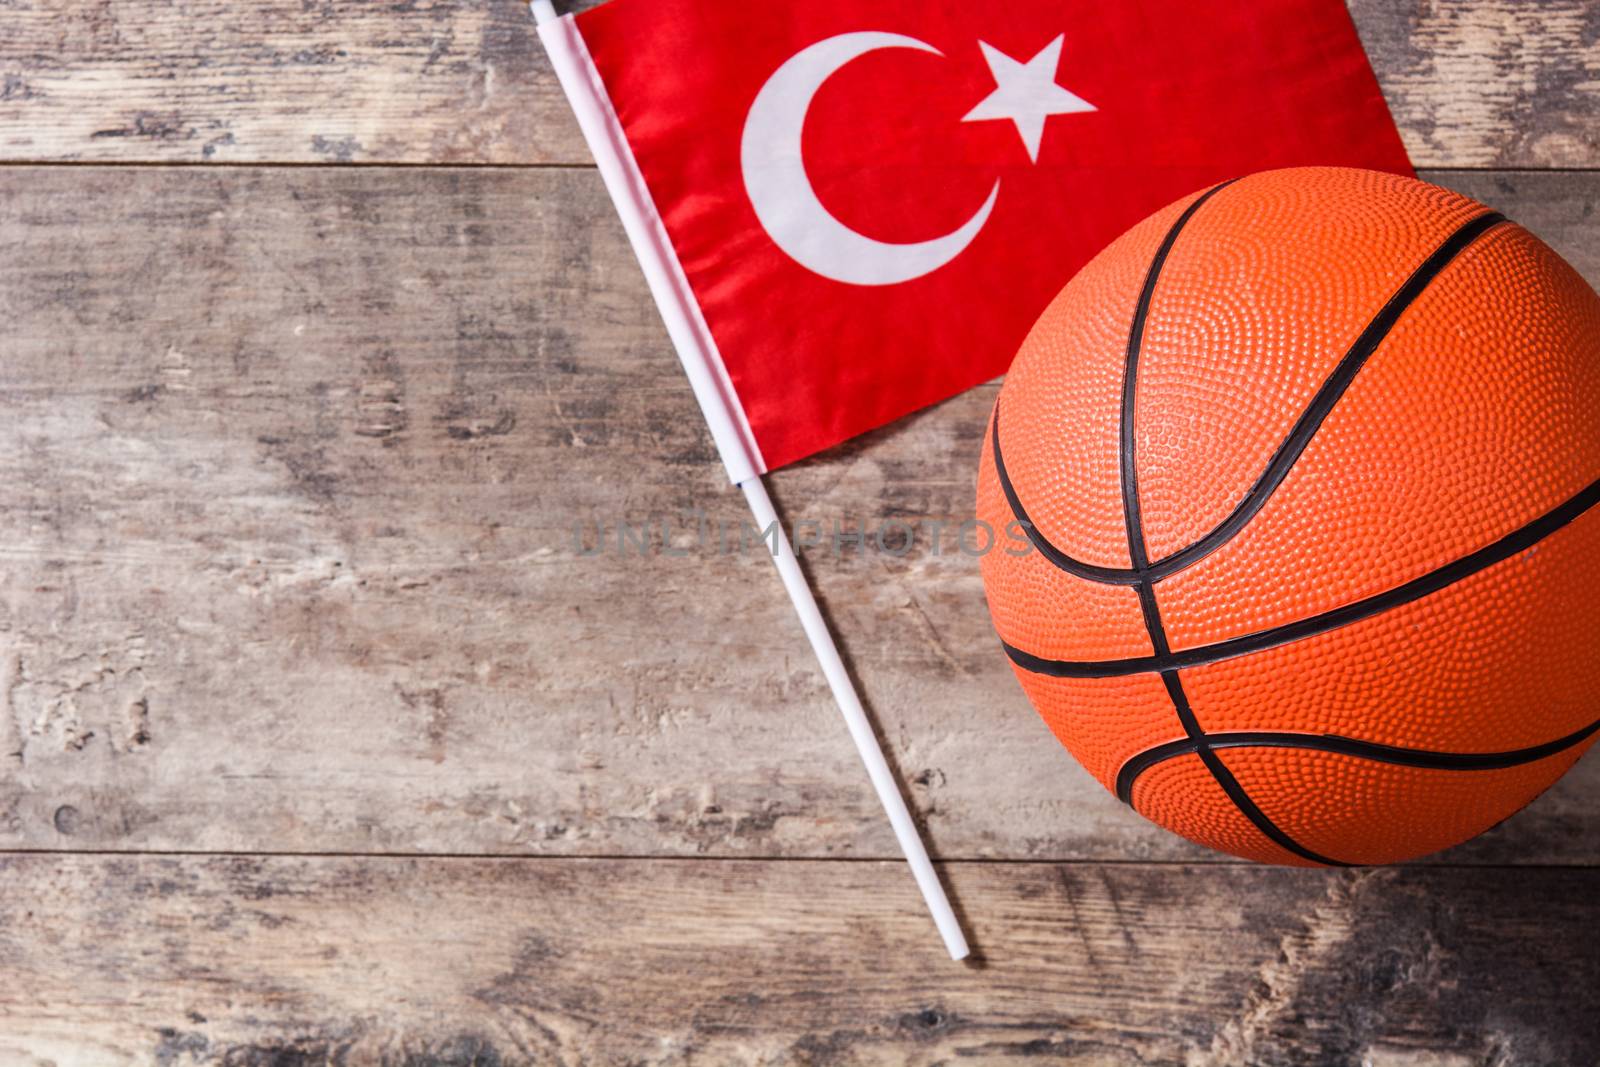 Basketball and Turkey flag on wooden table